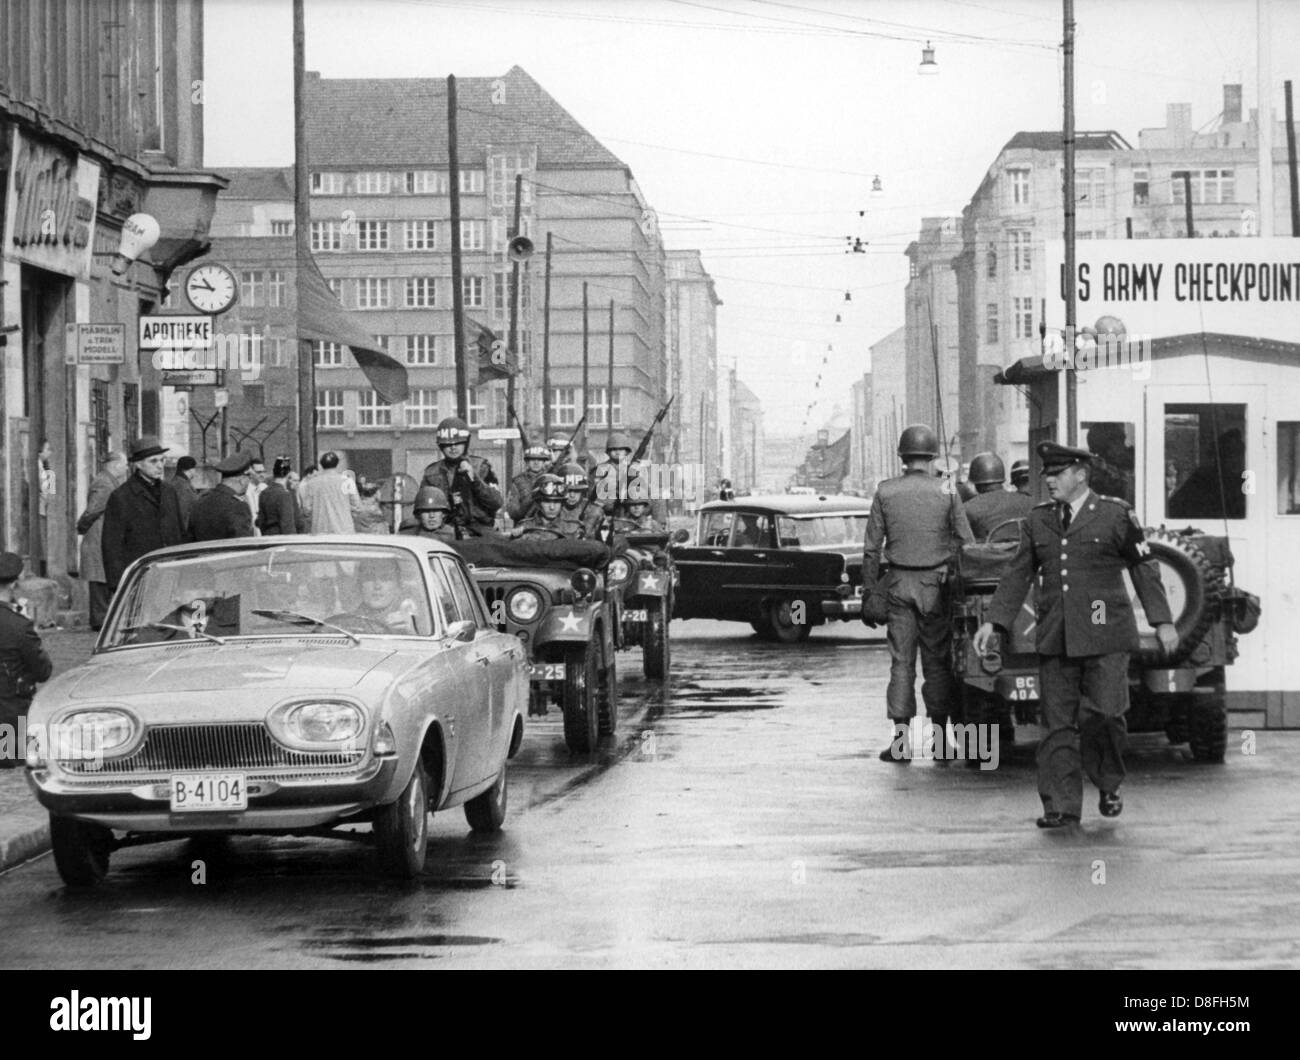 A limousine with US officers passes at Checkpoint Charlie from East to West Berlin, Germany, 25 October 1961. After GDR police officers had denied entrance to US civil servants, a convoy of twelve armed US soldiers entered with ostentation and ignoring signs to stop. Stock Photo